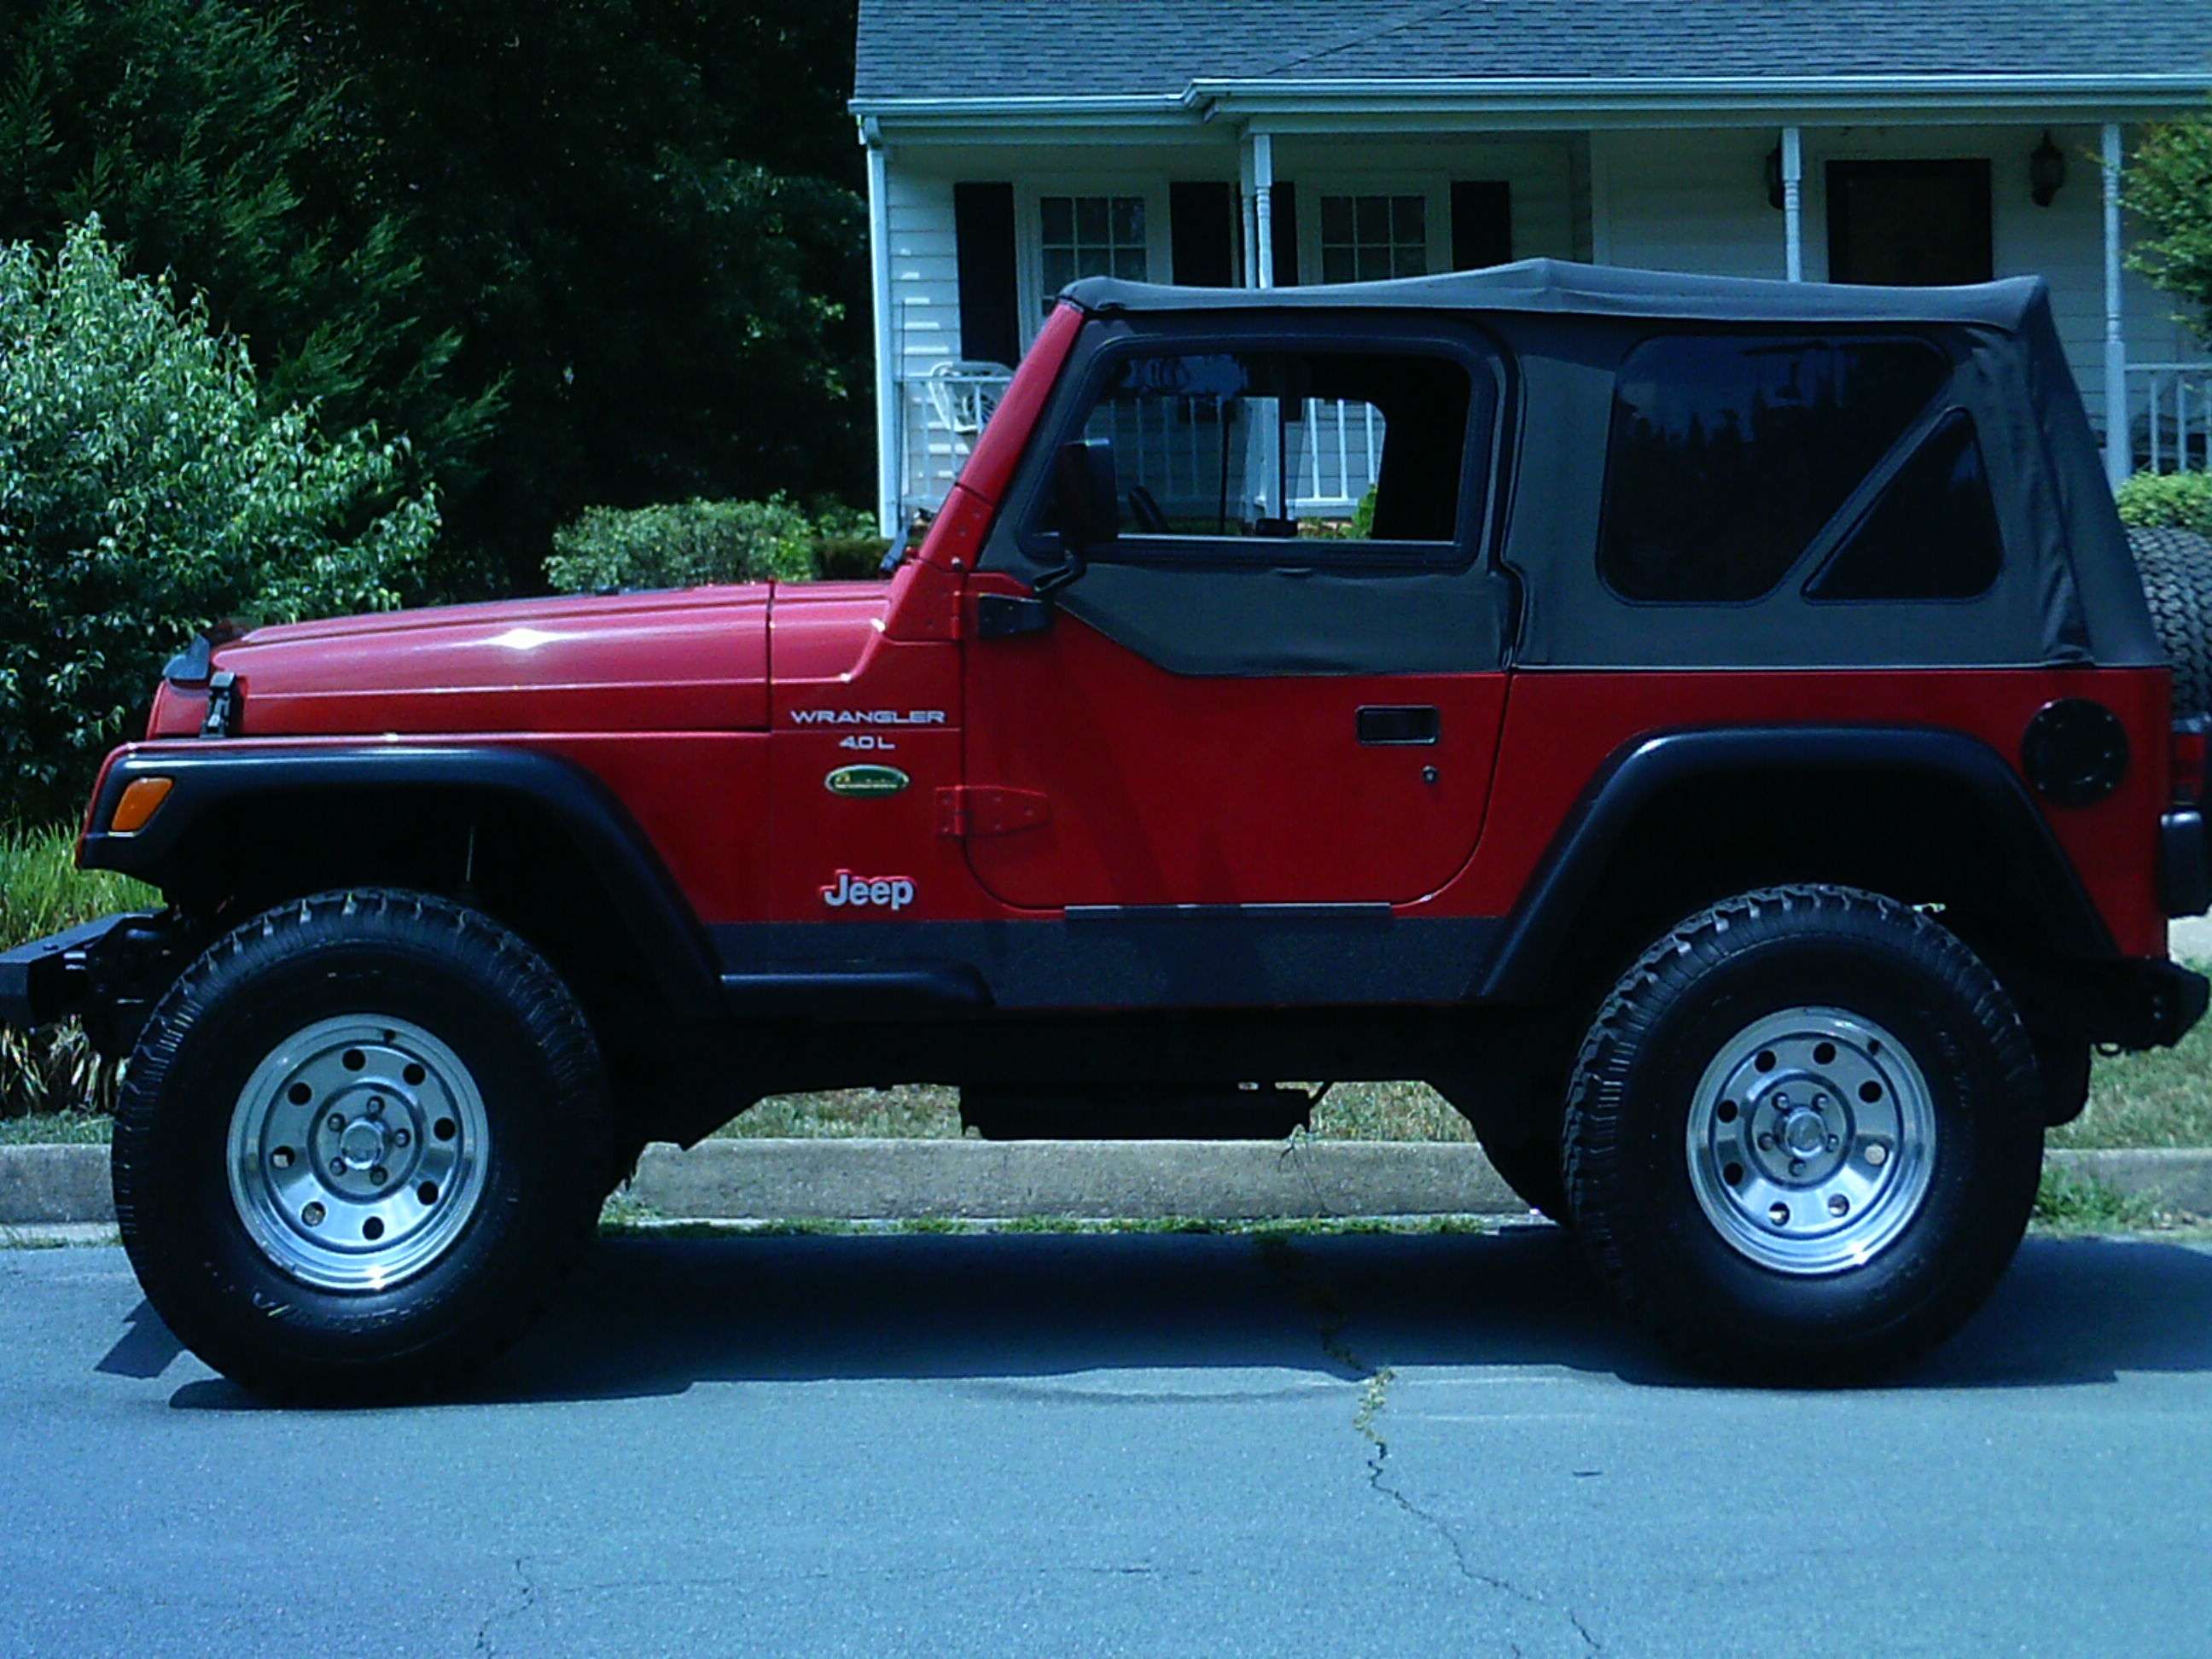 99 TJ with 200k miles | Jeep Enthusiast Forums